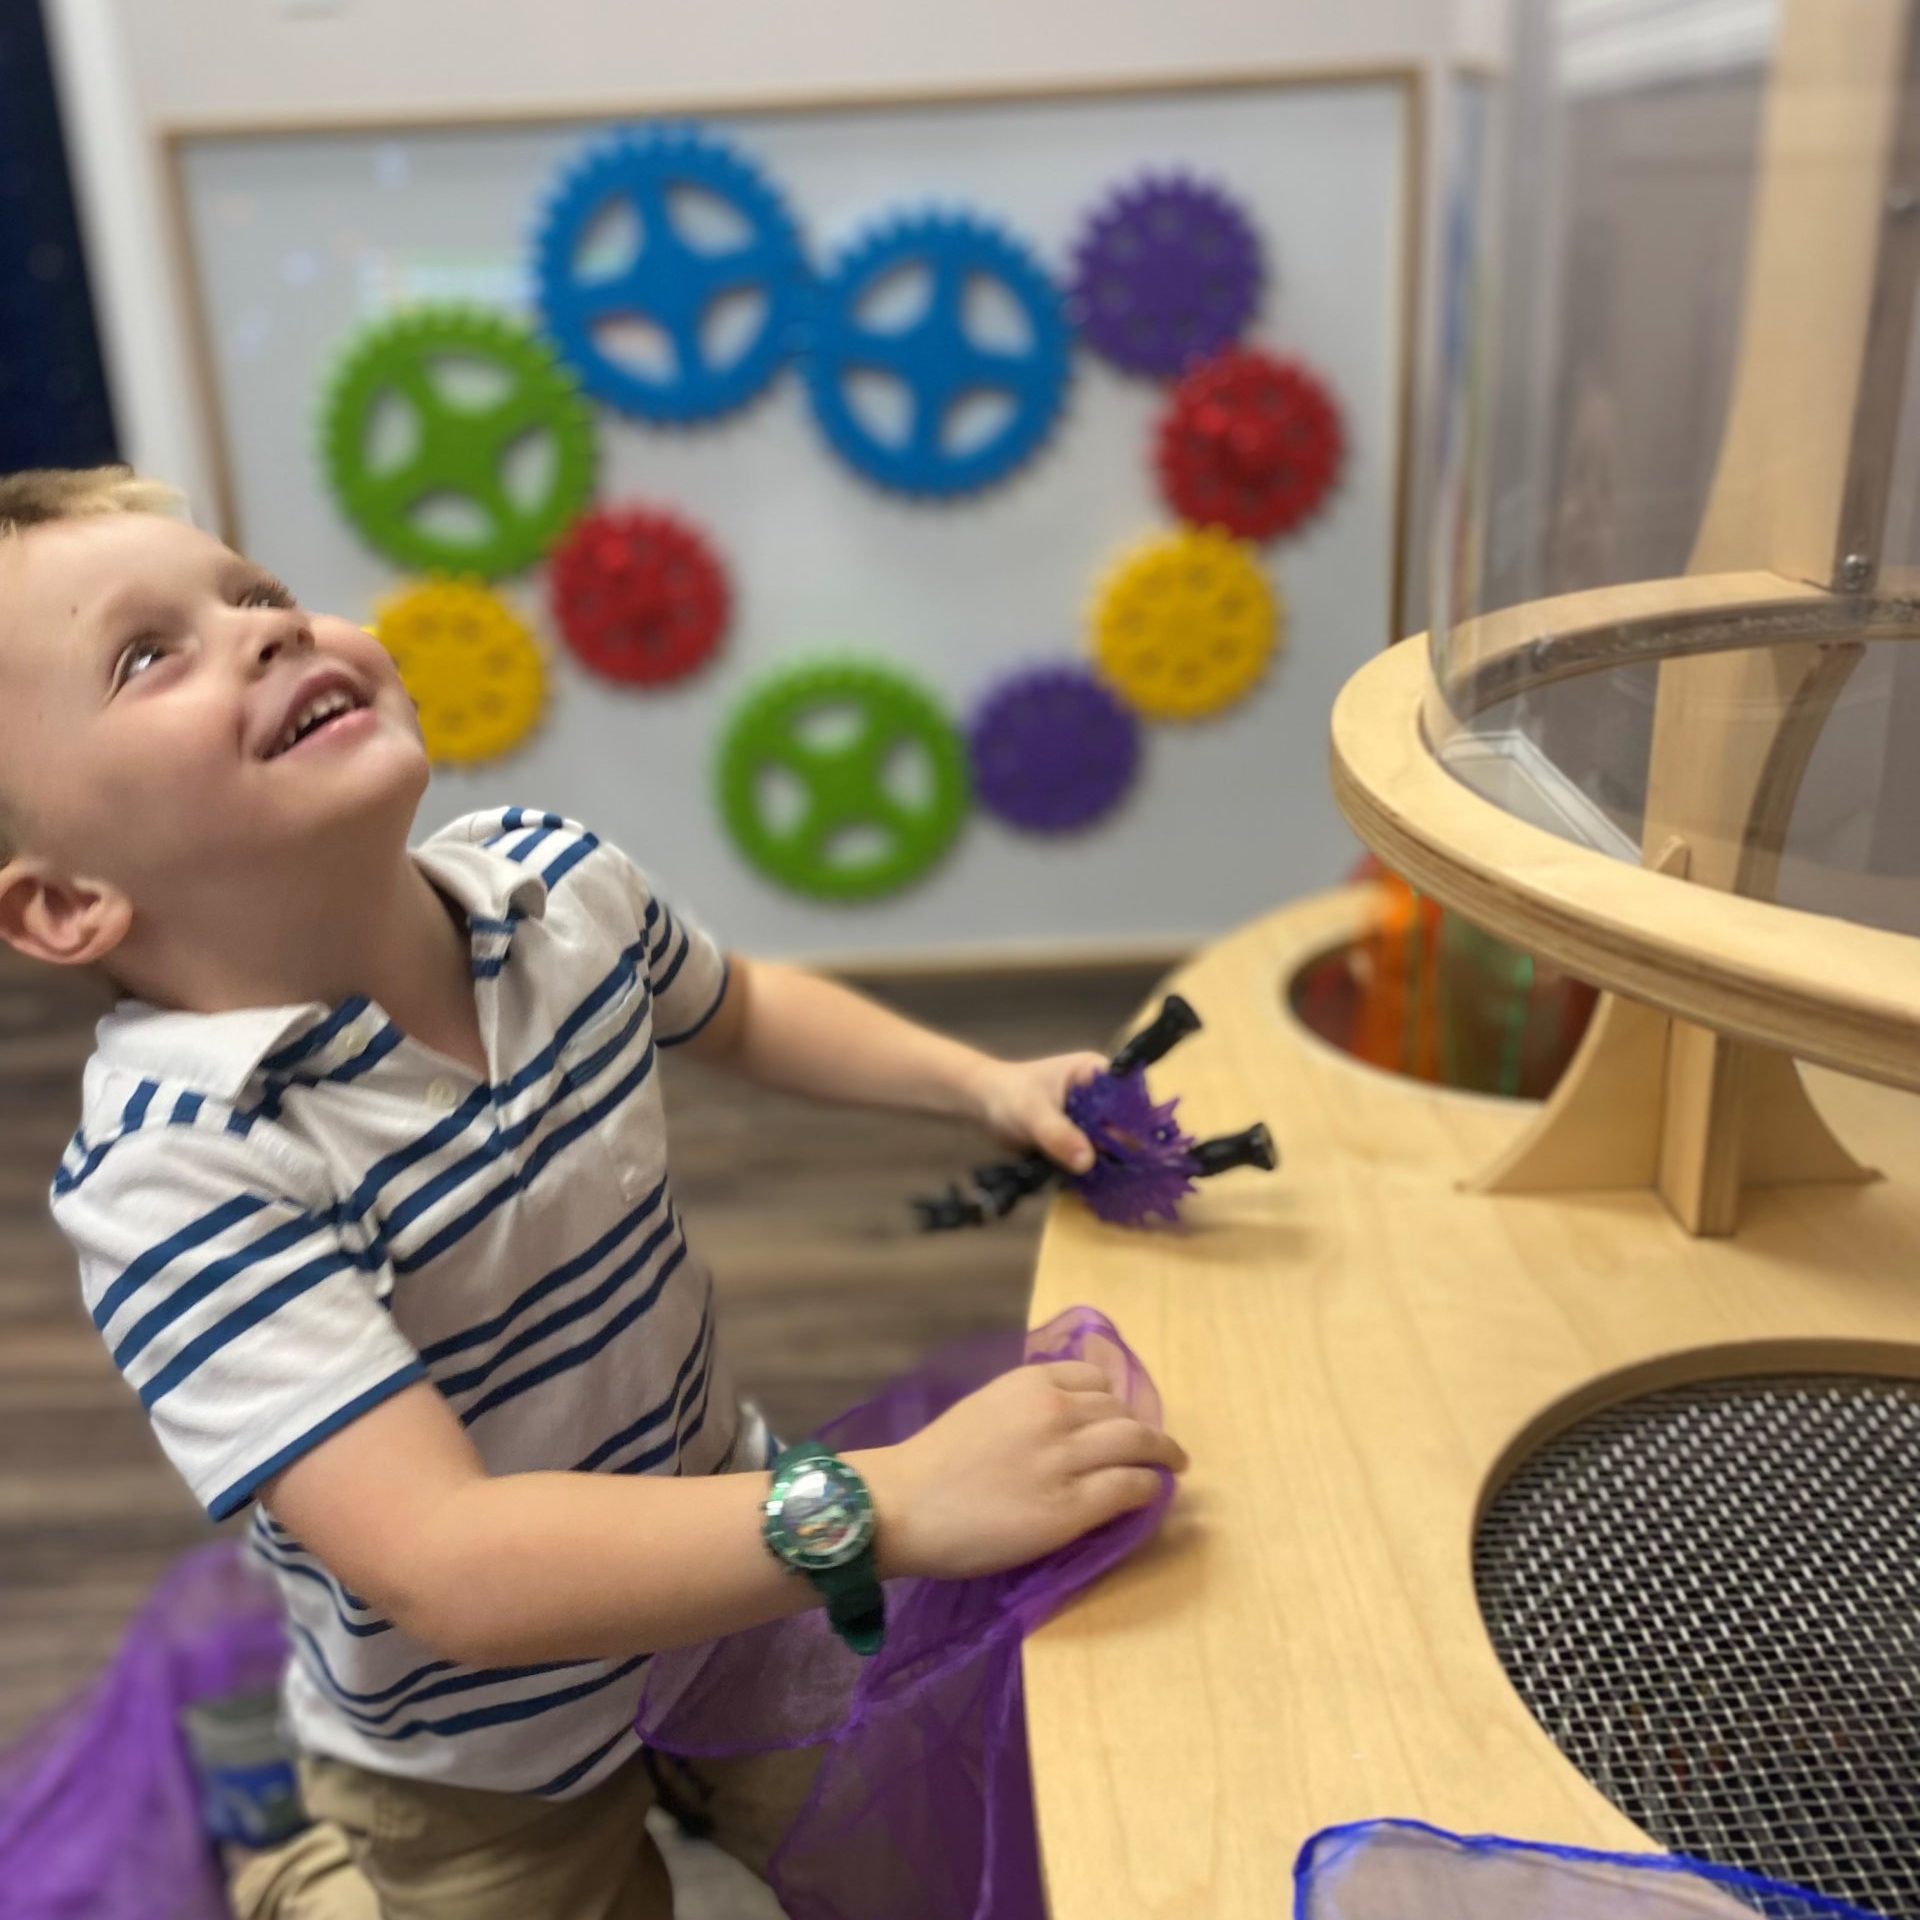 A young boy watches scarfs carried up through the wind tunnel into the air in the STEM room at the North Shore Children's Museum in Peabody, MA